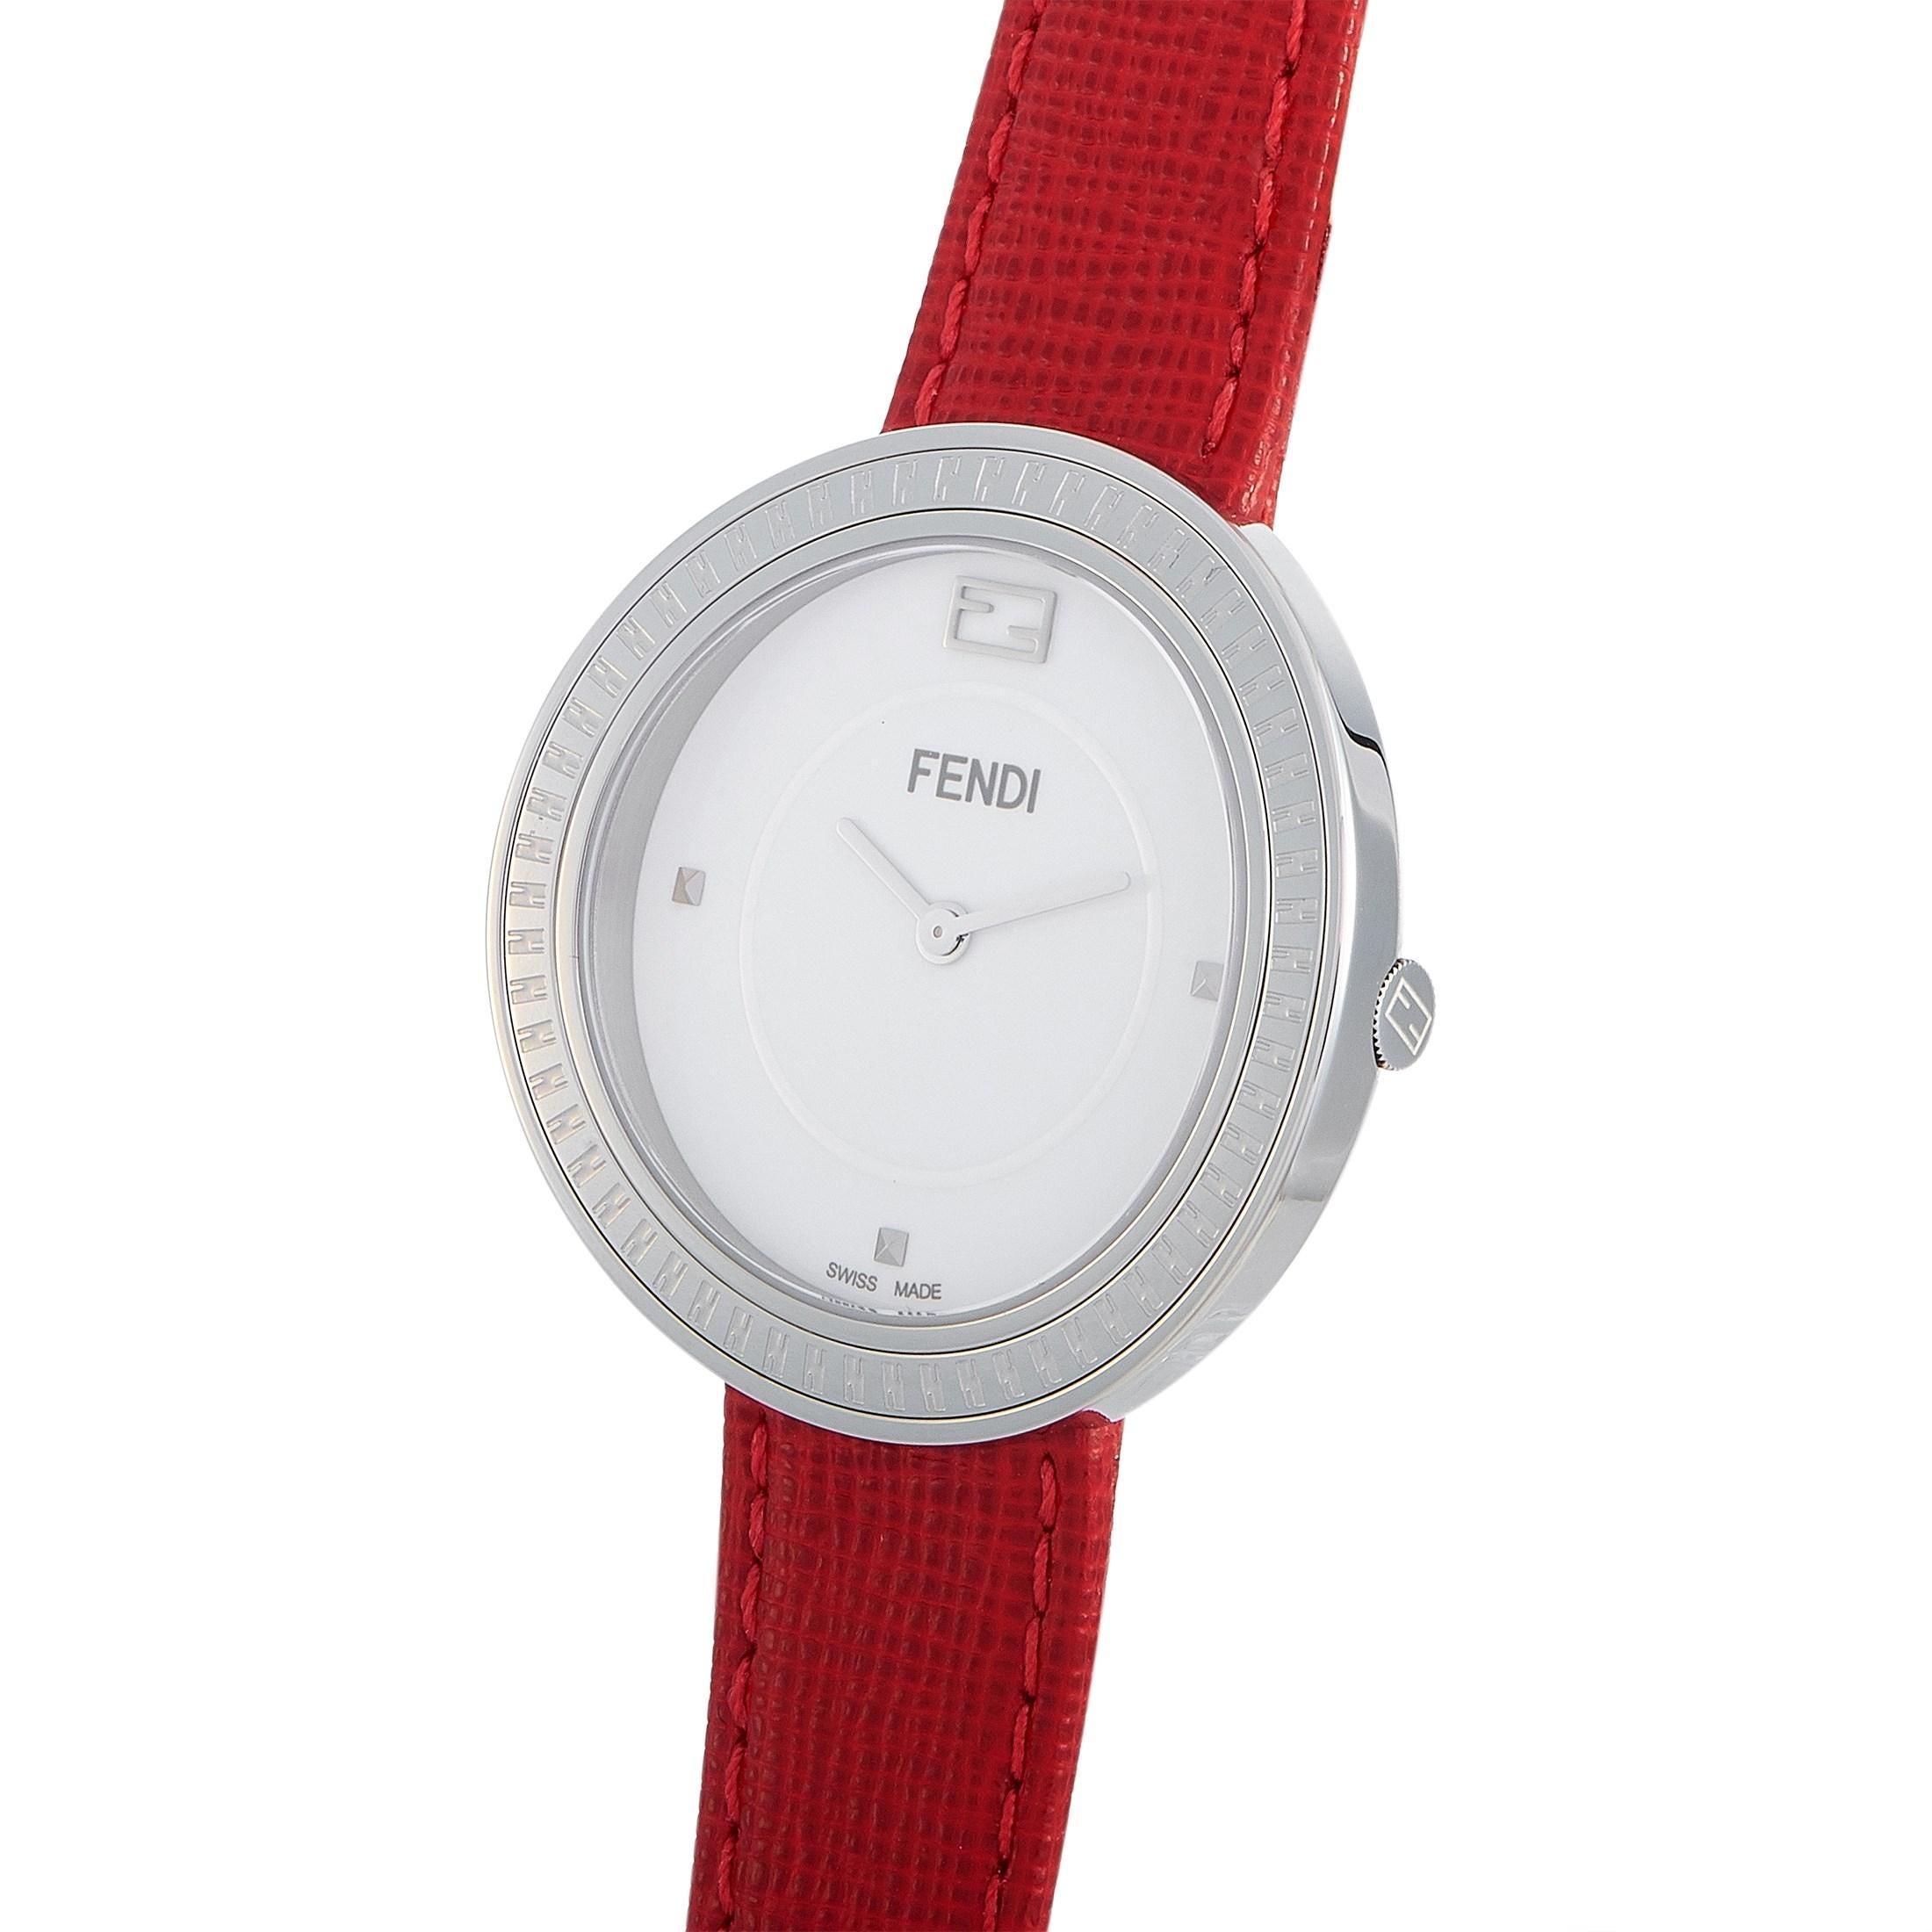 The Fendi My Way watch, reference number F354034073, boasts a 36 mm stainless steel case that is presented on a red leather strap, secured on the wrist with a tang buckle. This model is powered by a quartz movement and indicates hours and minutes on